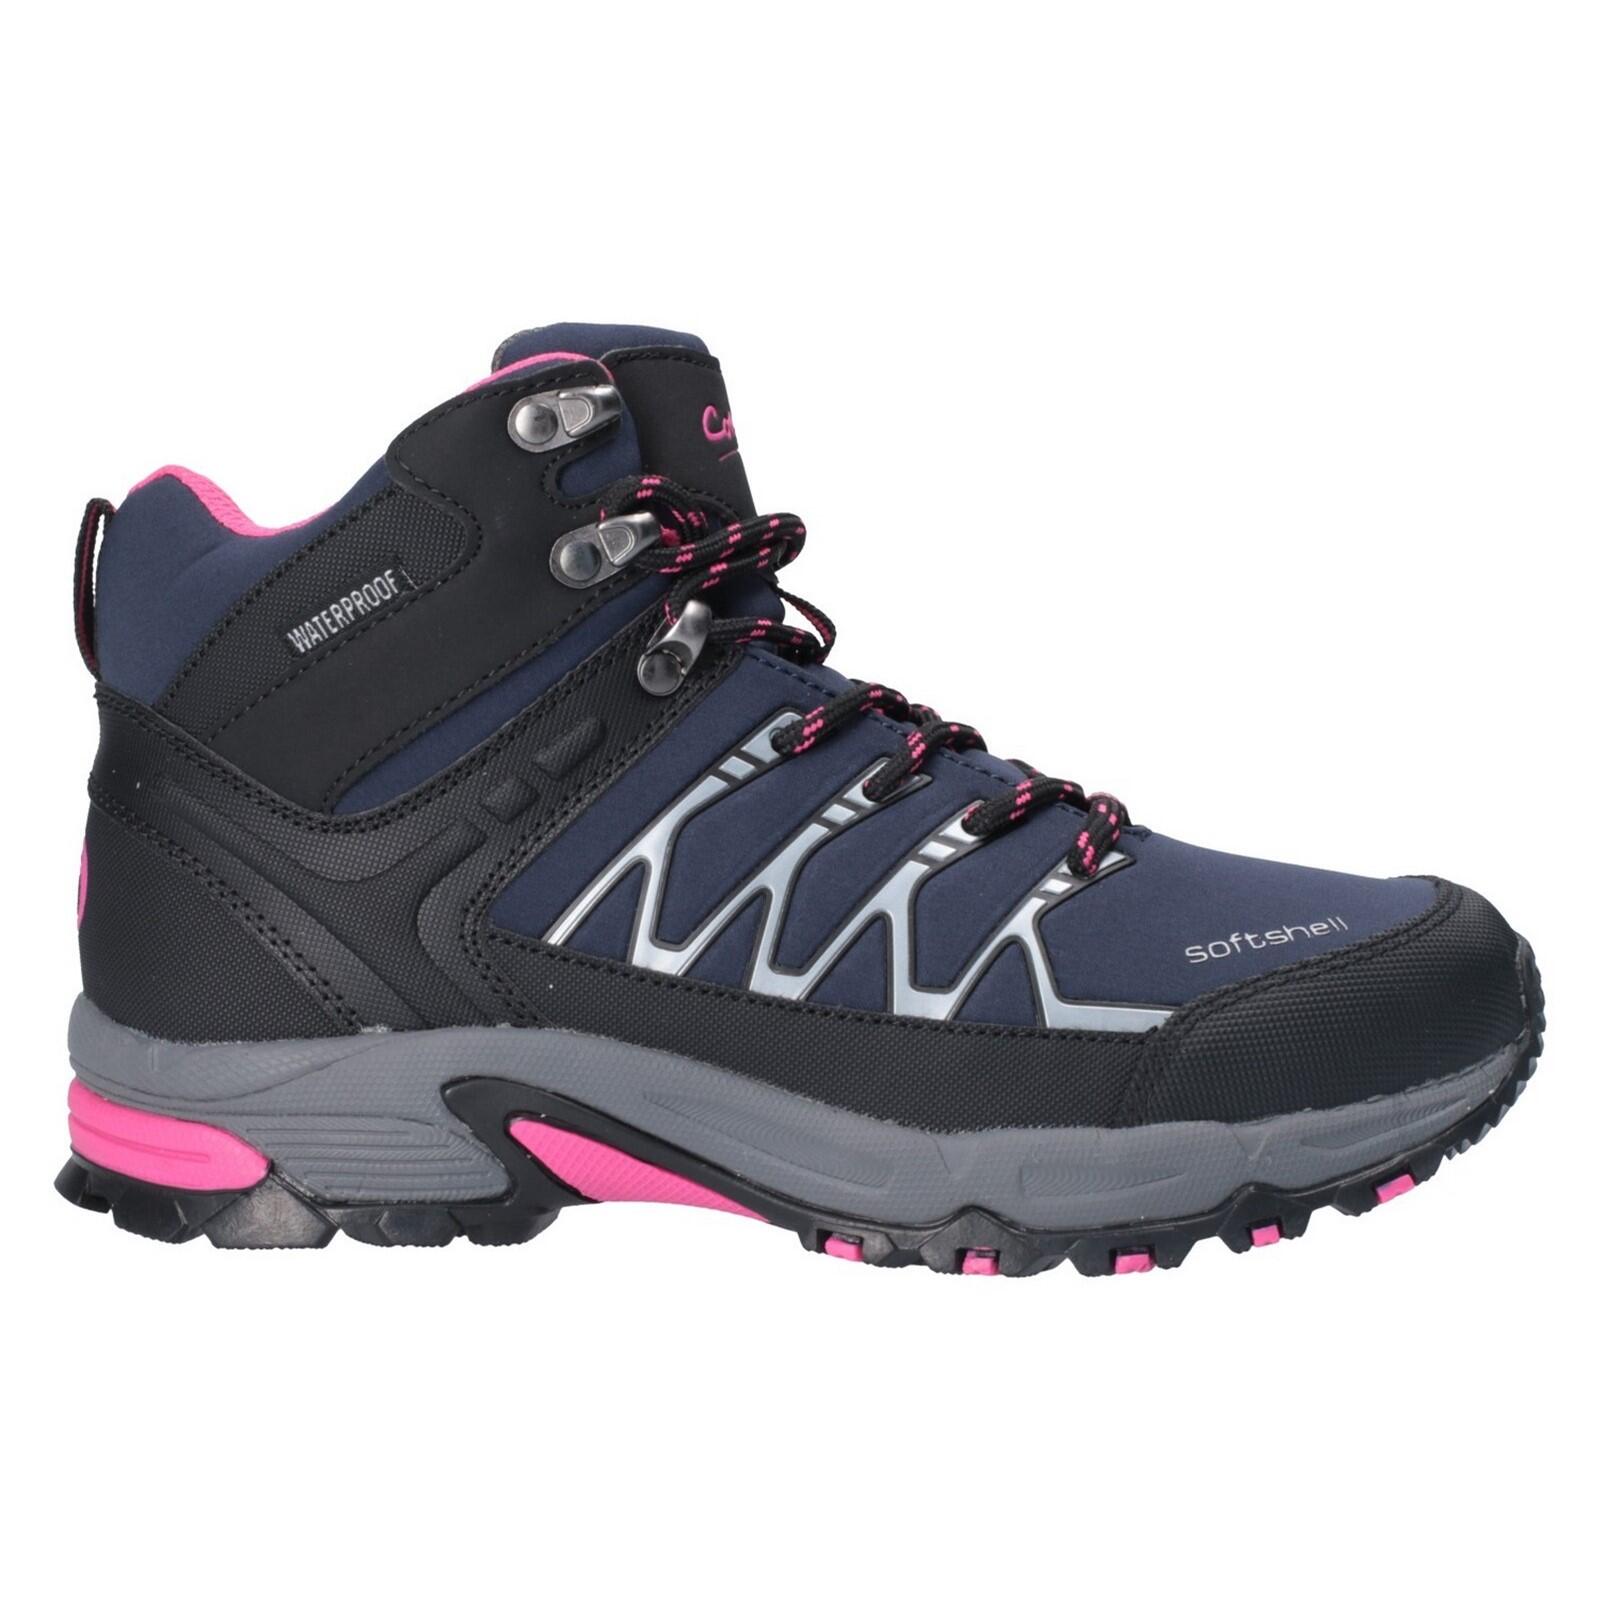 COTSWOLD Abbeydale Mid Ladies Hiking Boots Navy blue